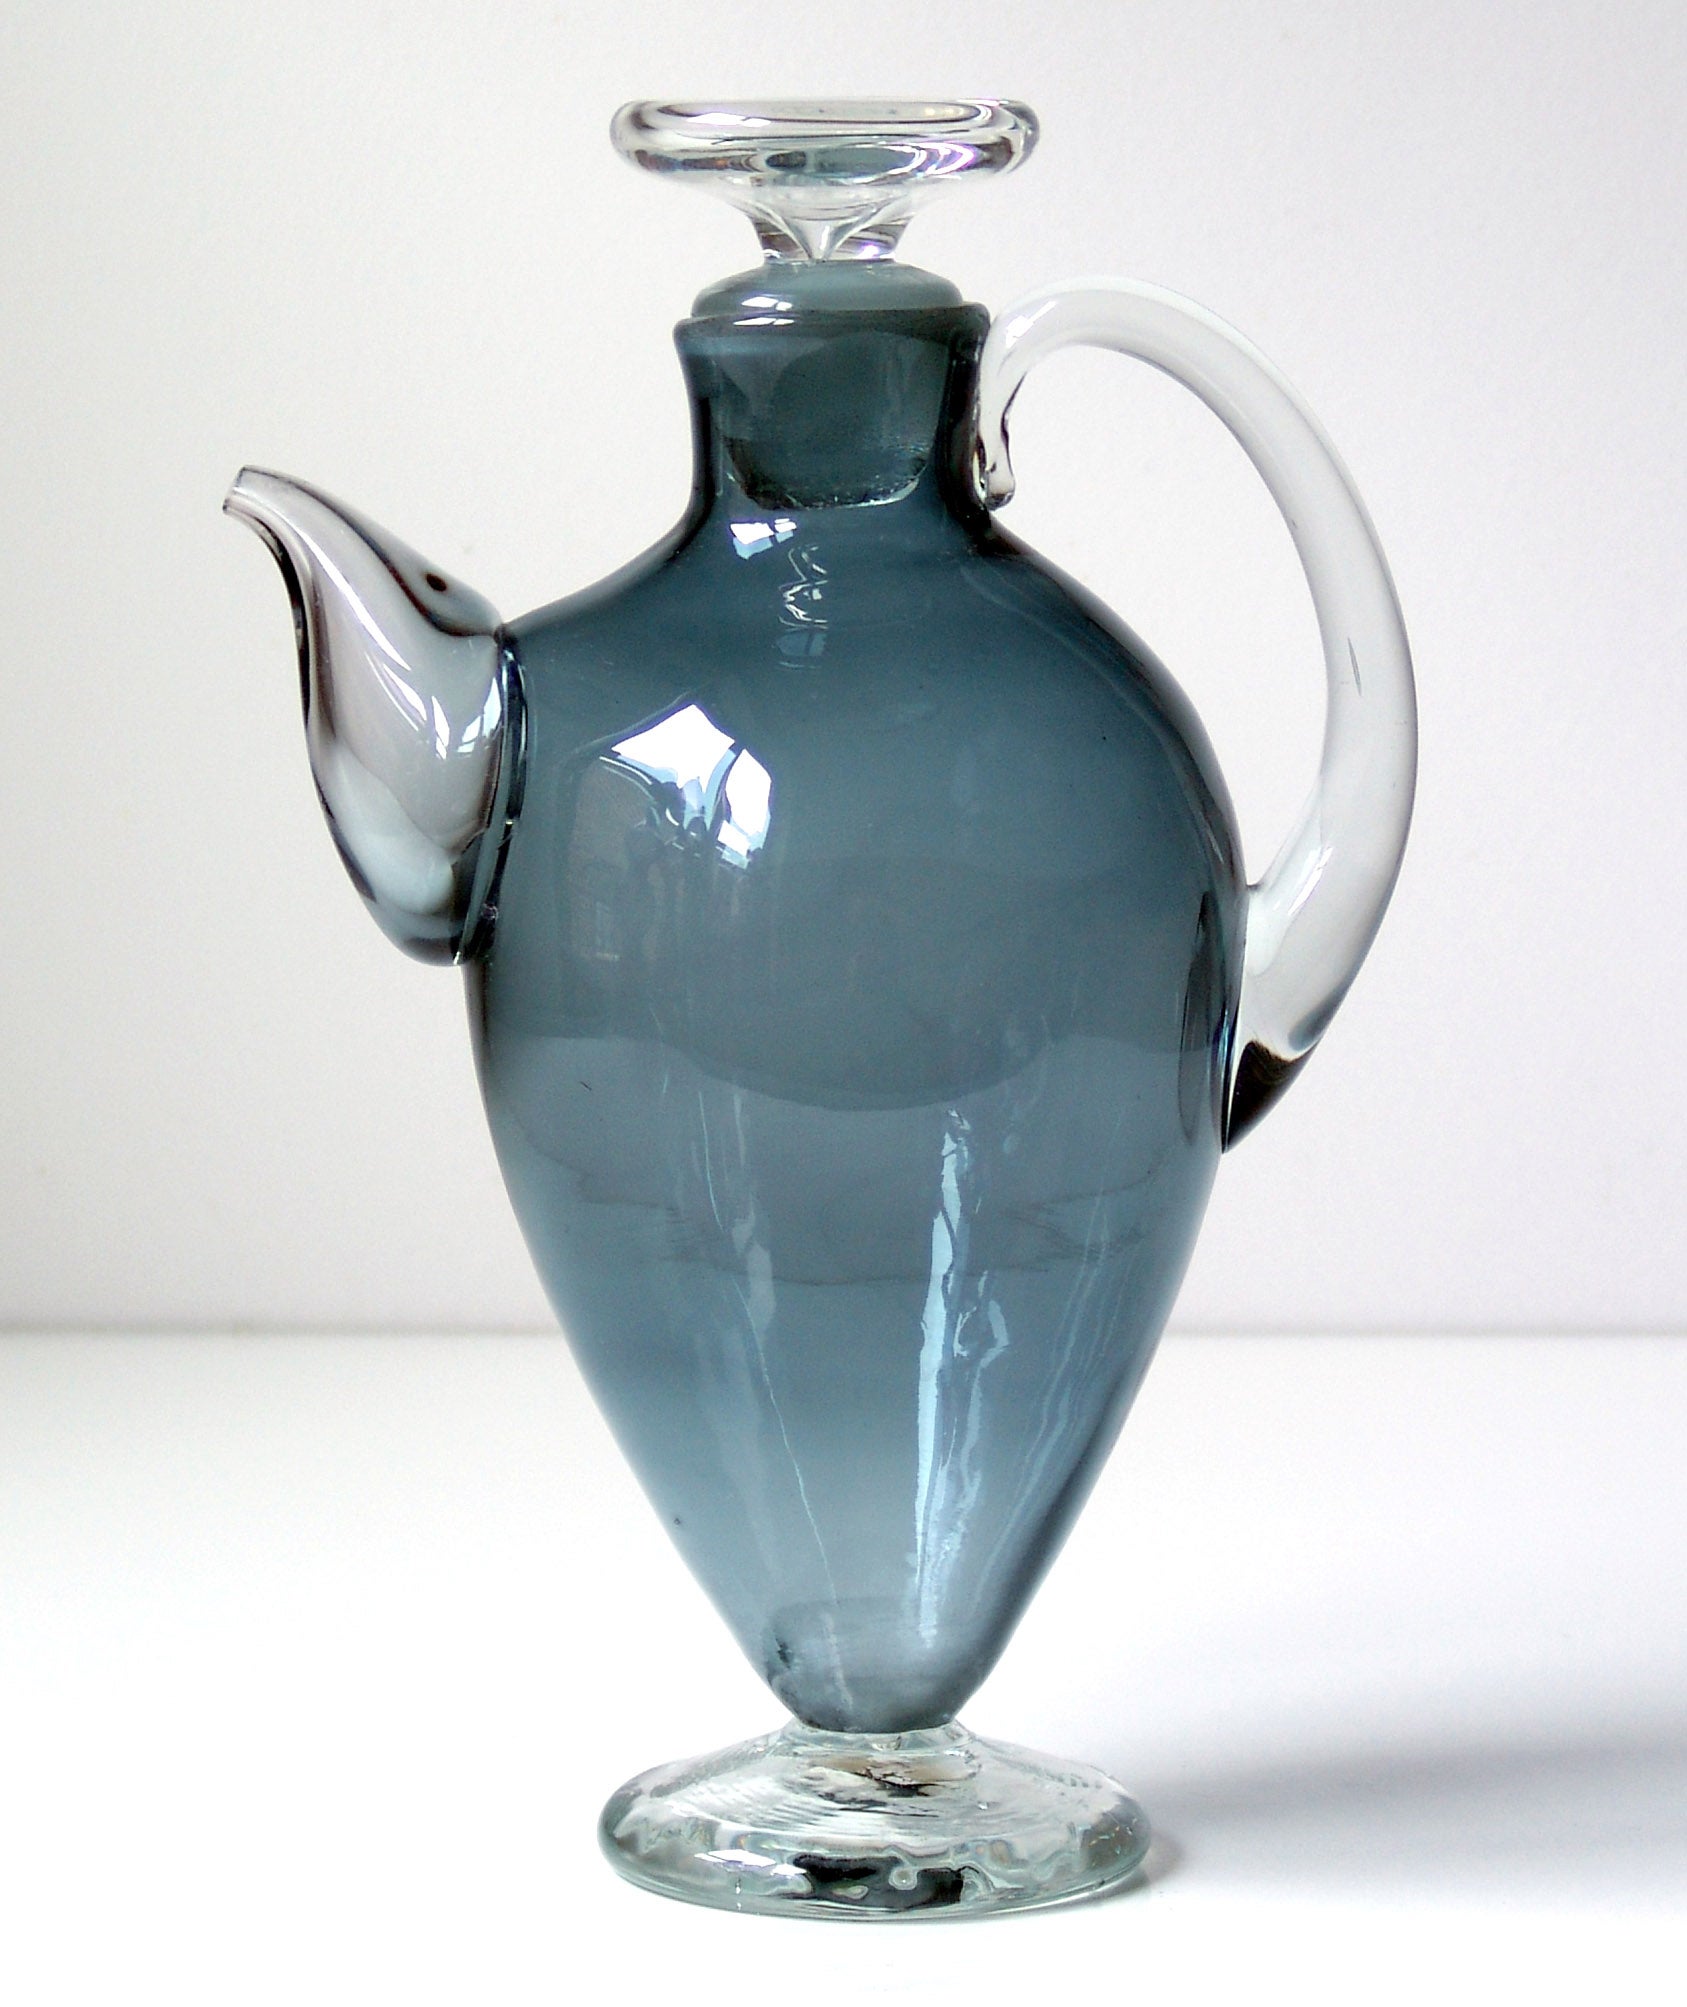 1957 Art Glass Cocktail Decanter by Wayne Husted for Blenko